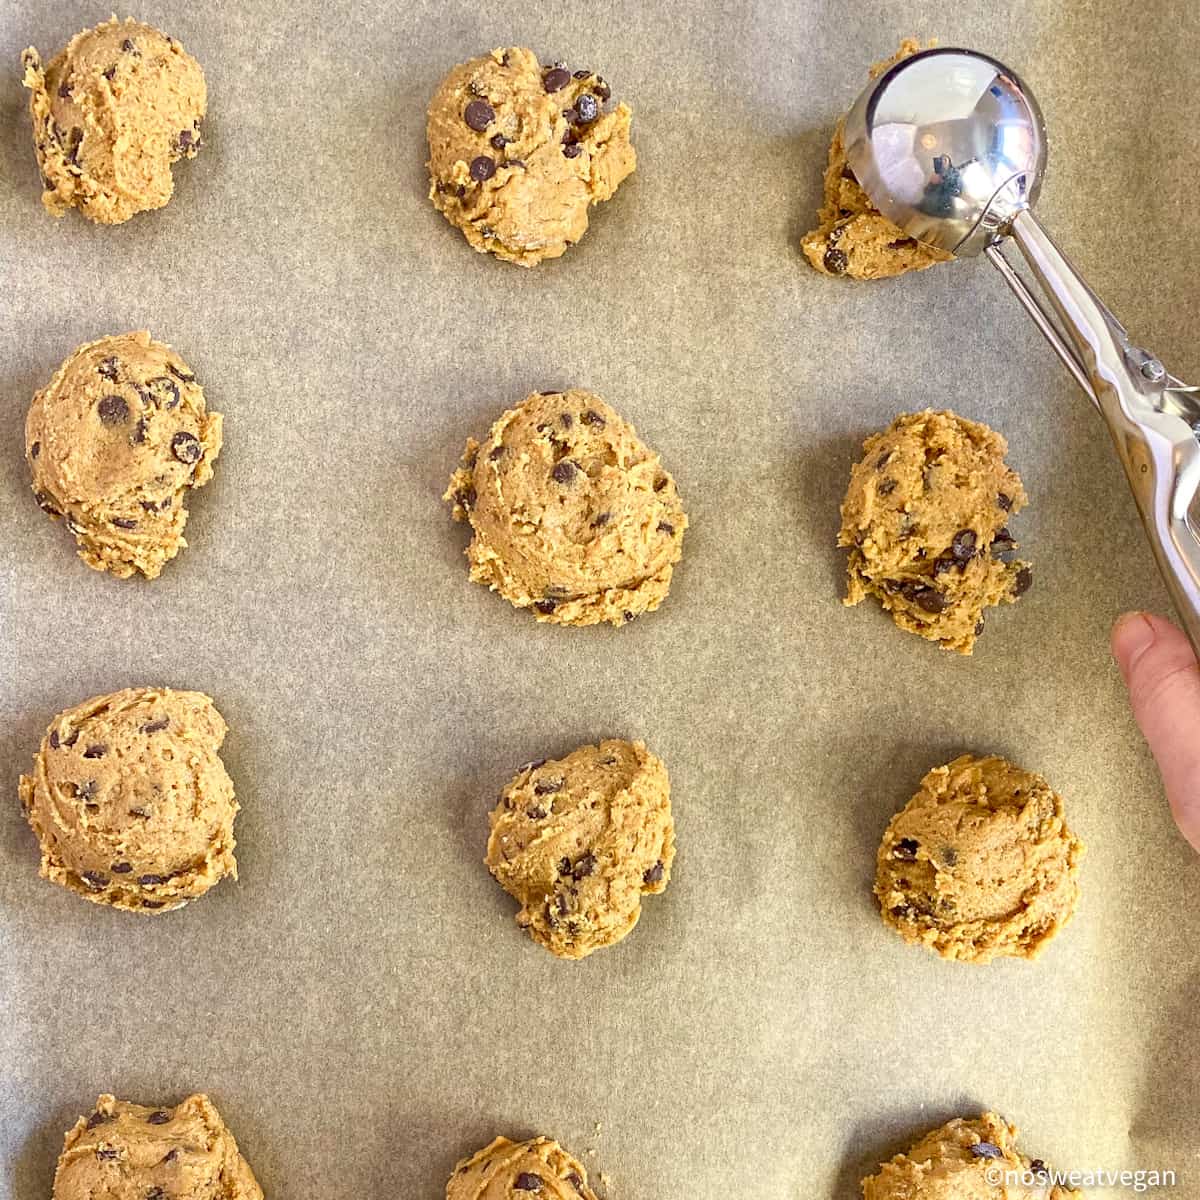 Use an ice cream scoop or two spoons to transfer the vegan cookie dough onto the lined baking sheets.